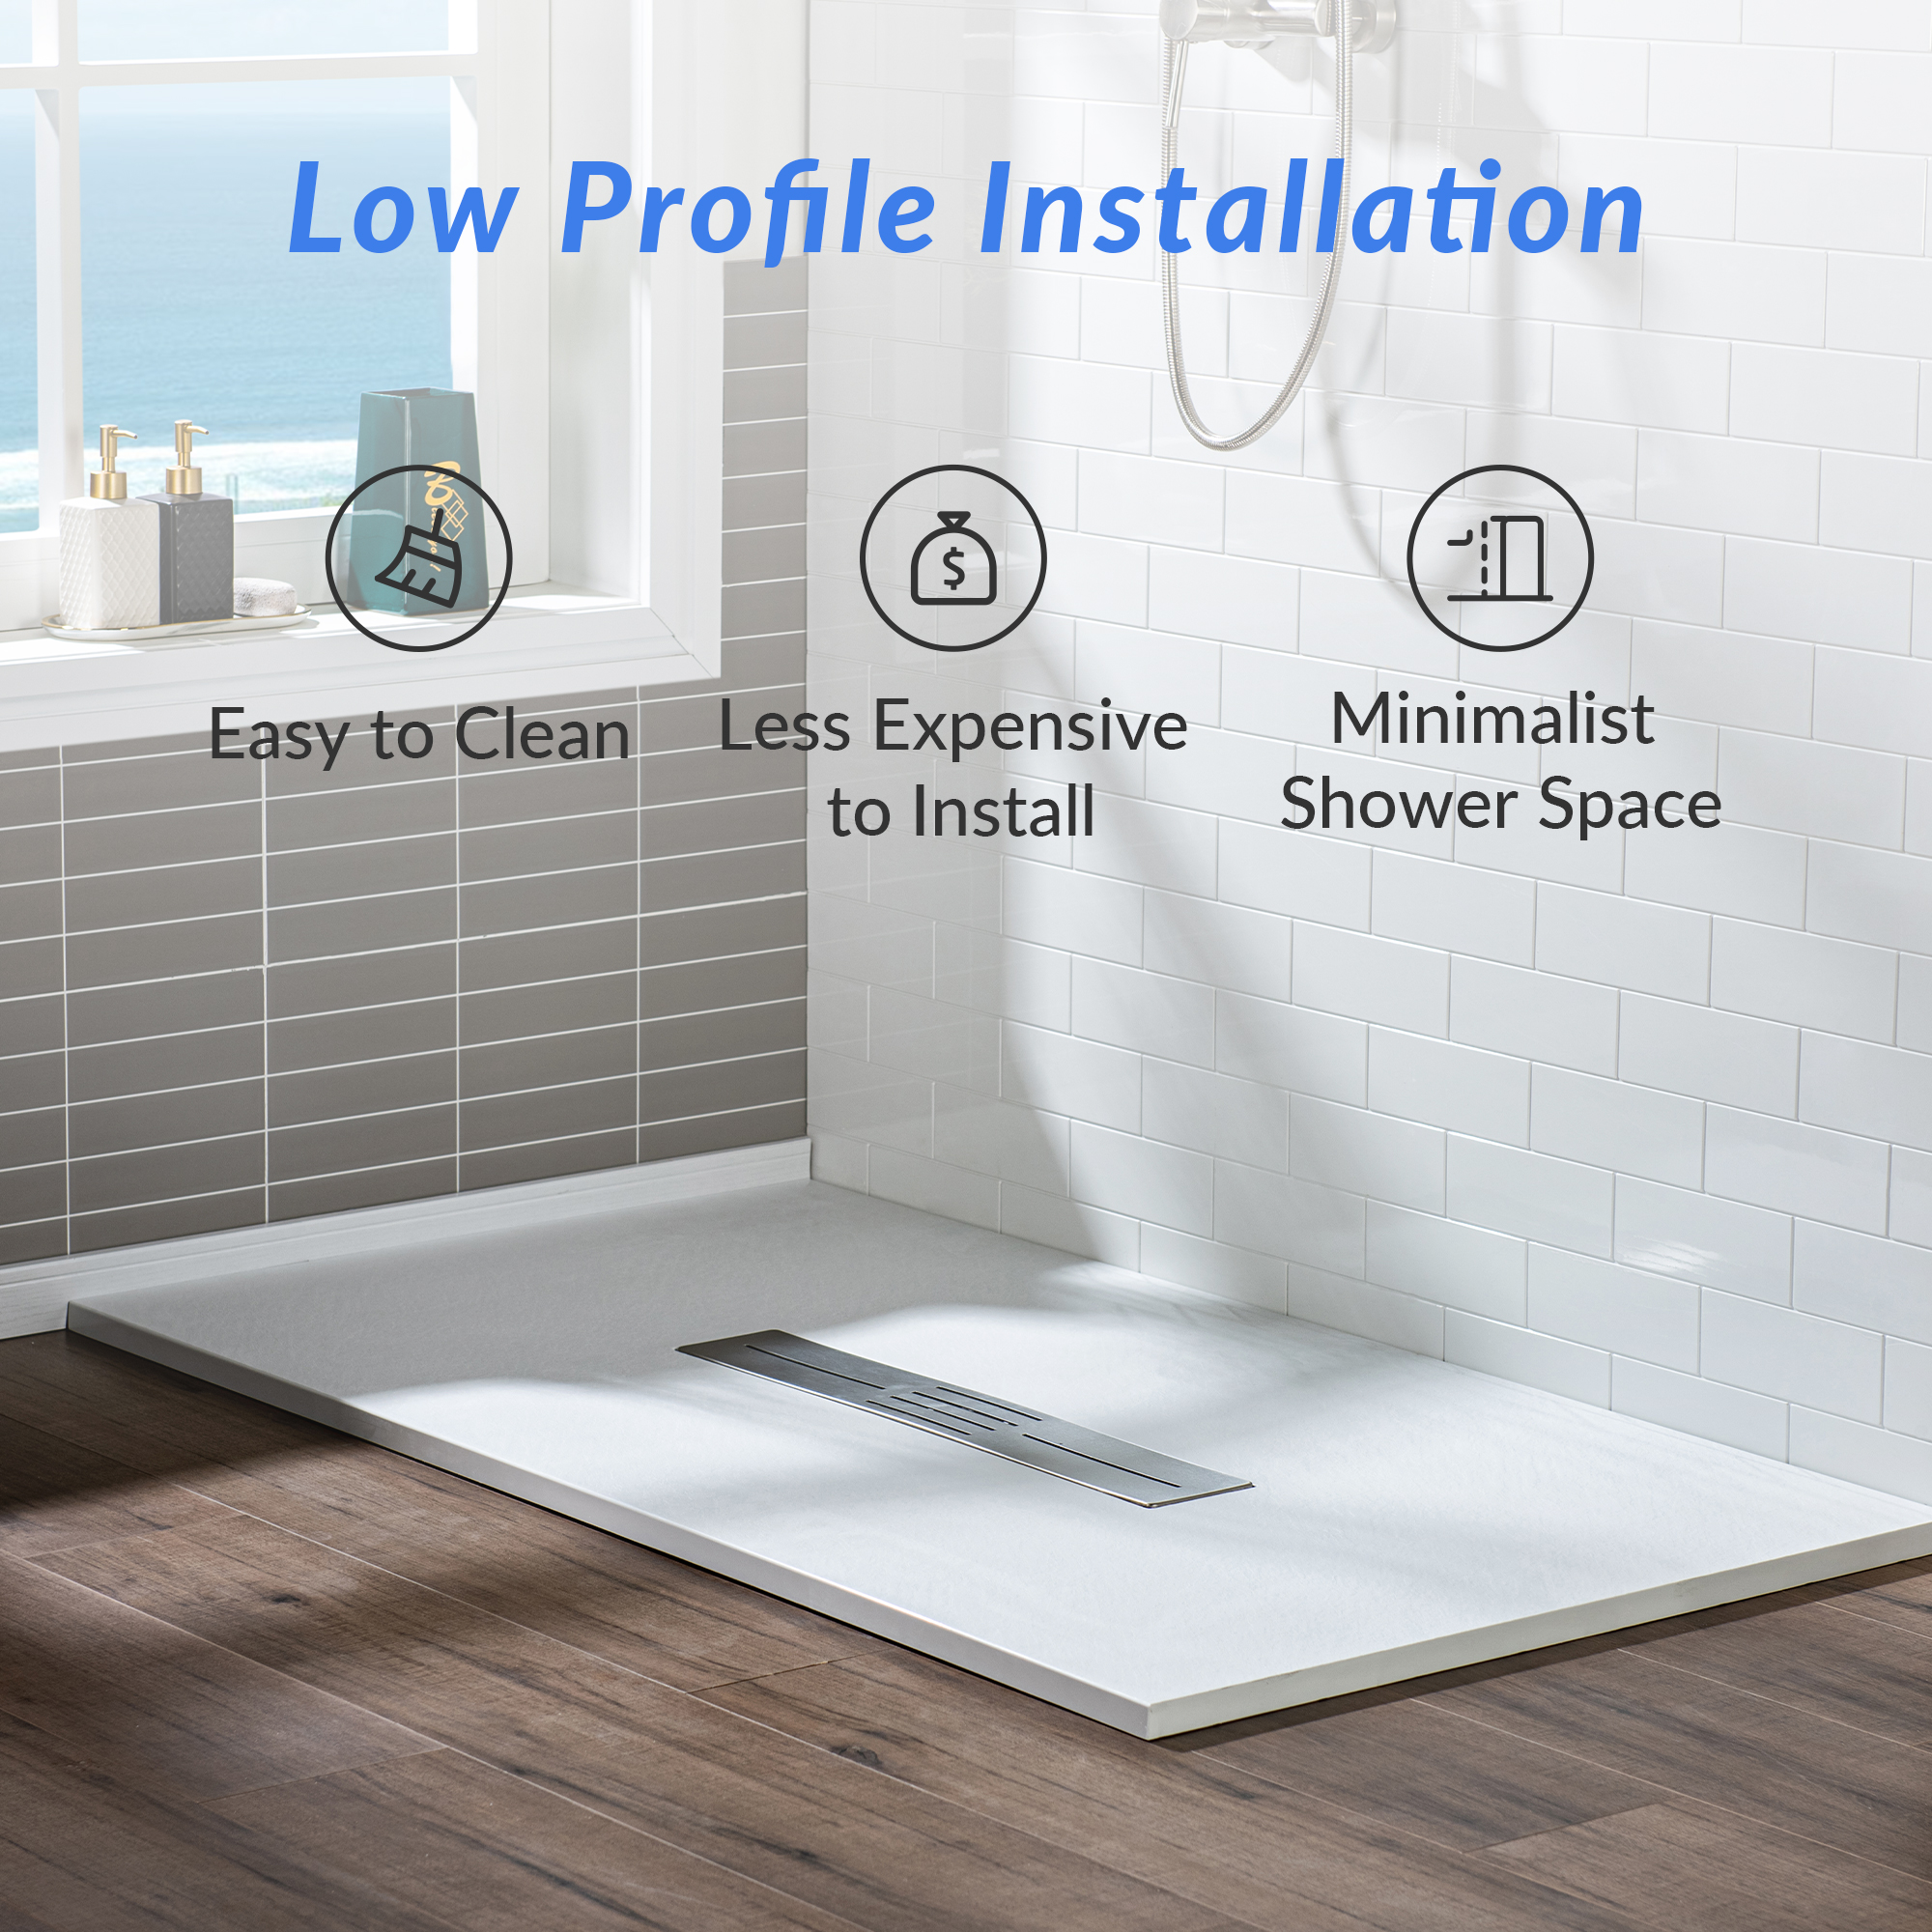  WOODBRIDGE 48-in L x 32-in W Zero Threshold End Drain Shower Base with Center Drain Placement, Matching Decorative Drain Plate and Tile Flange, Wheel Chair Access, Low Profile, White_12461